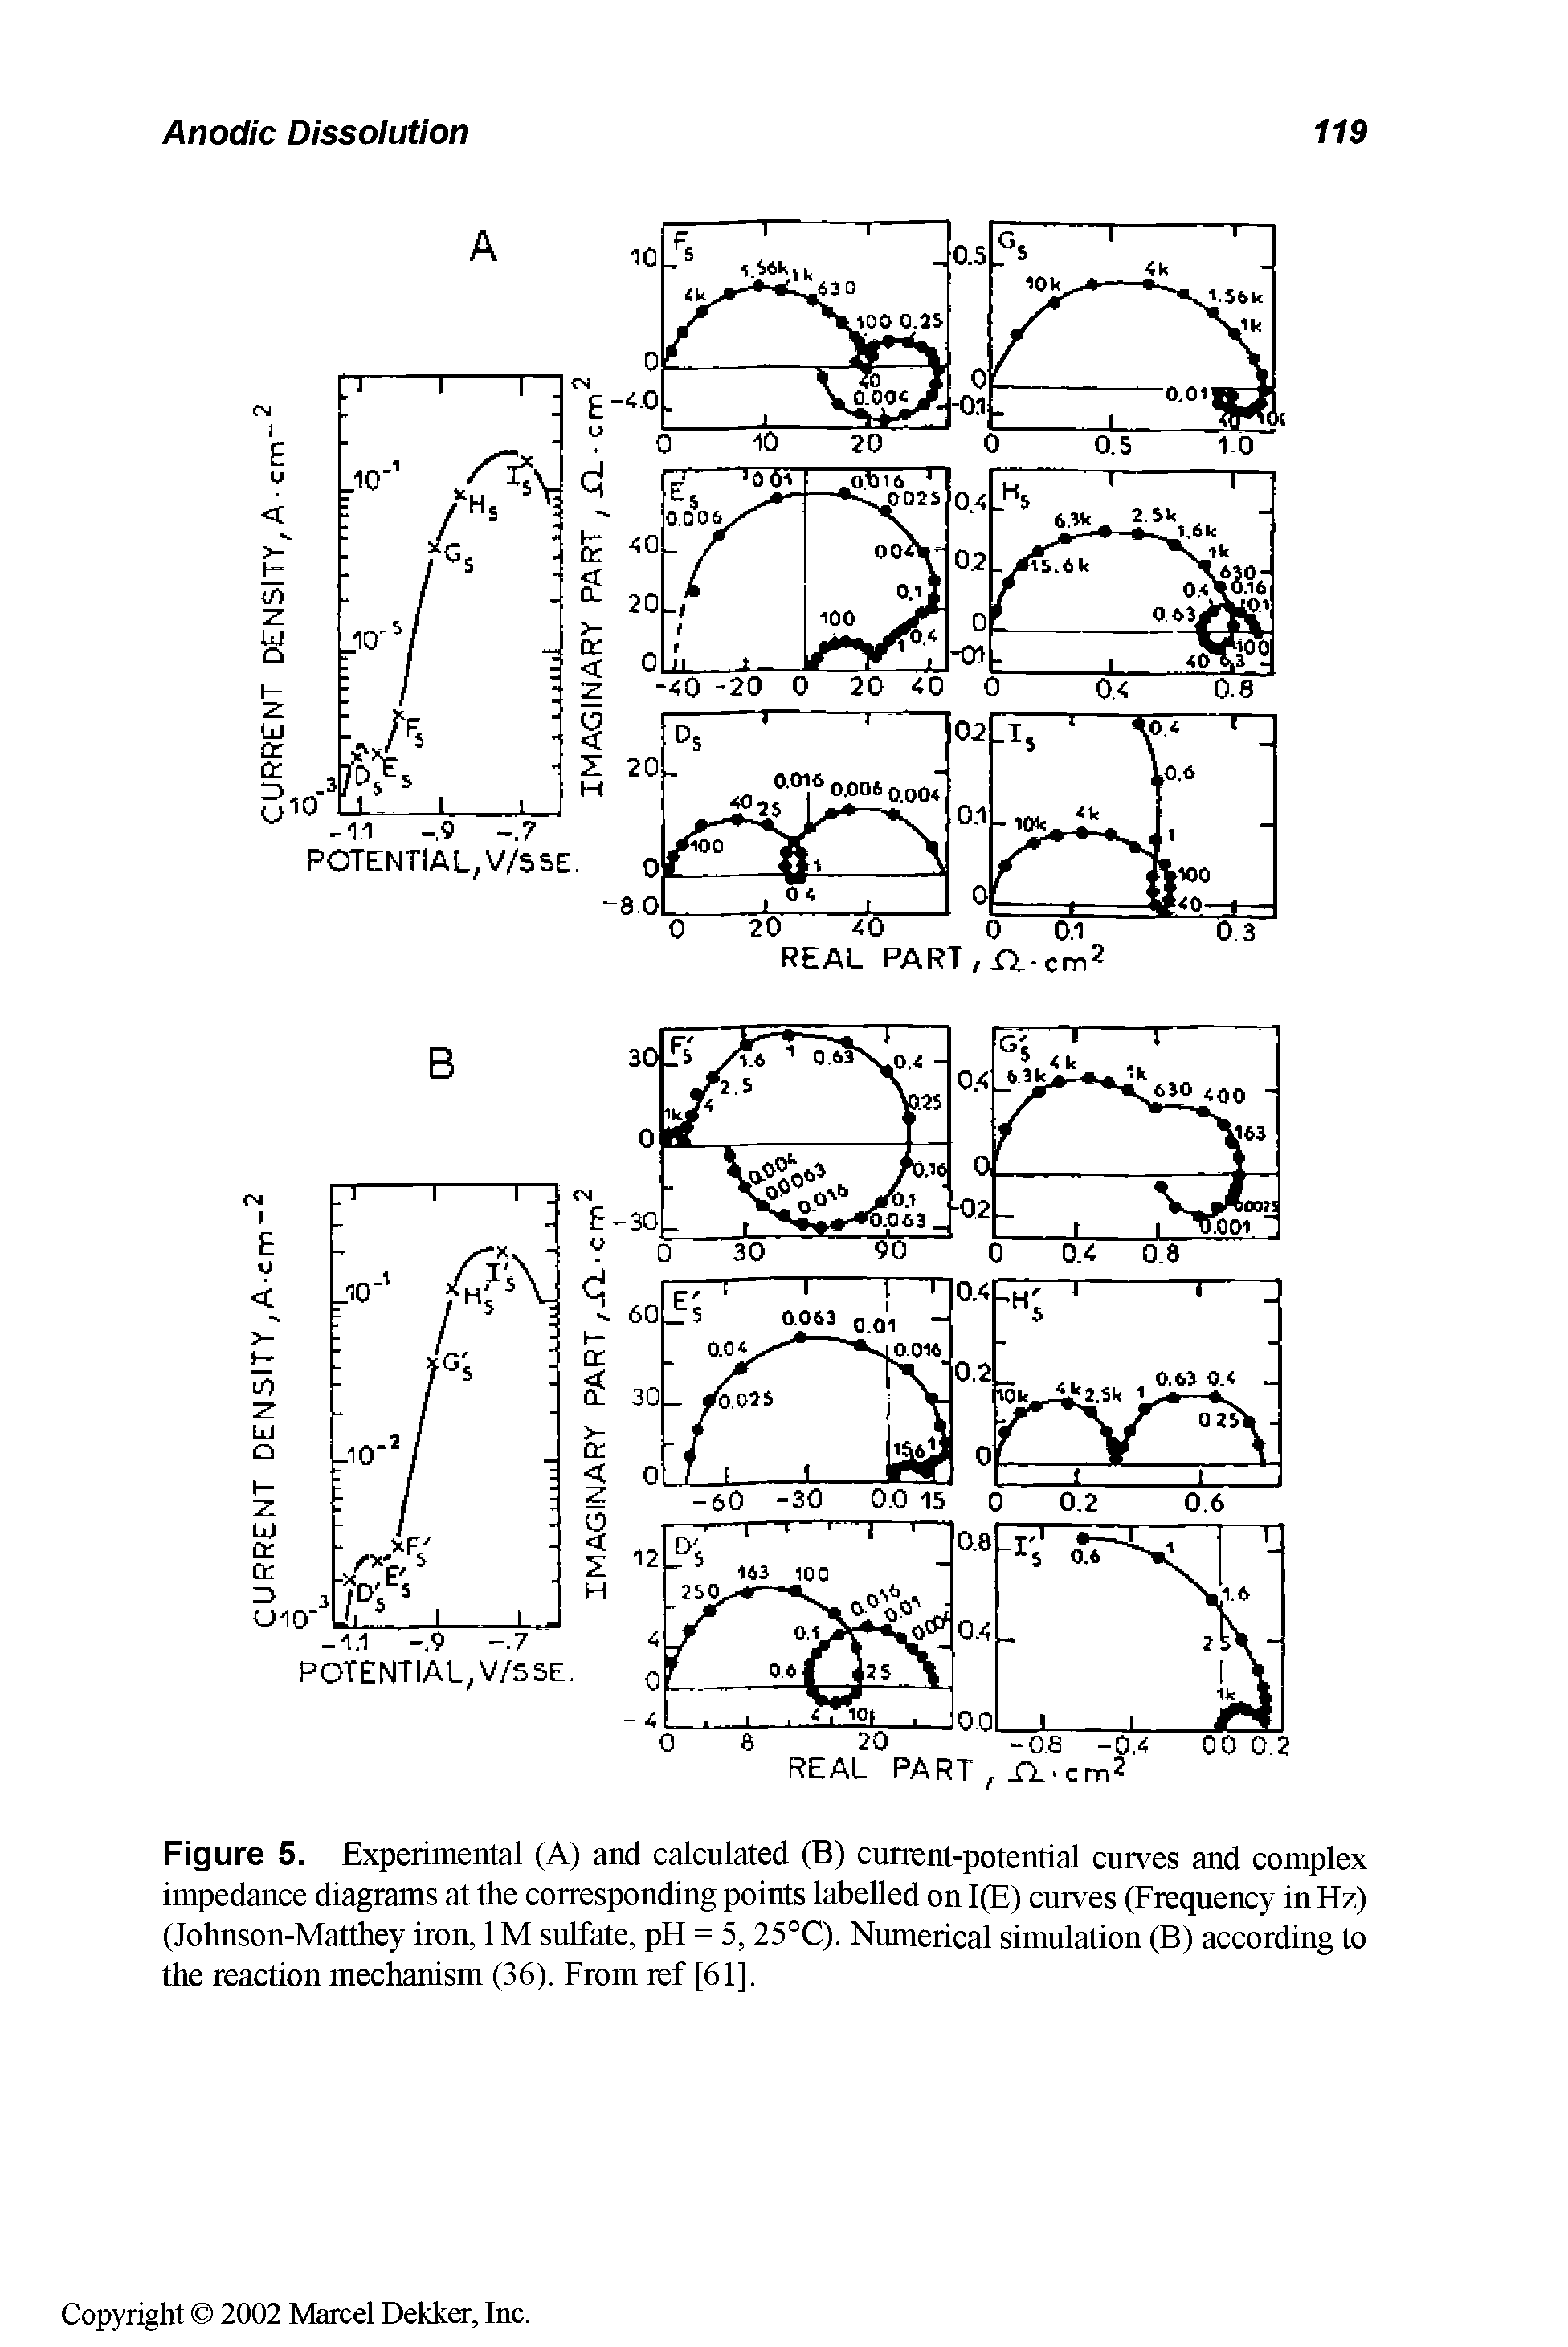 Figure 5. Experimental (A) and calculated (B) current-potential curves and complex impedance diagrams at the corresponding points labelled on 1(E) curves (Frequency in Hz) (Johnson-Matthey iron, 1M sulfate, pH = 5, 25°C). Numerical simulation (B) according to the reaction mechanism (36). From ref [61],...